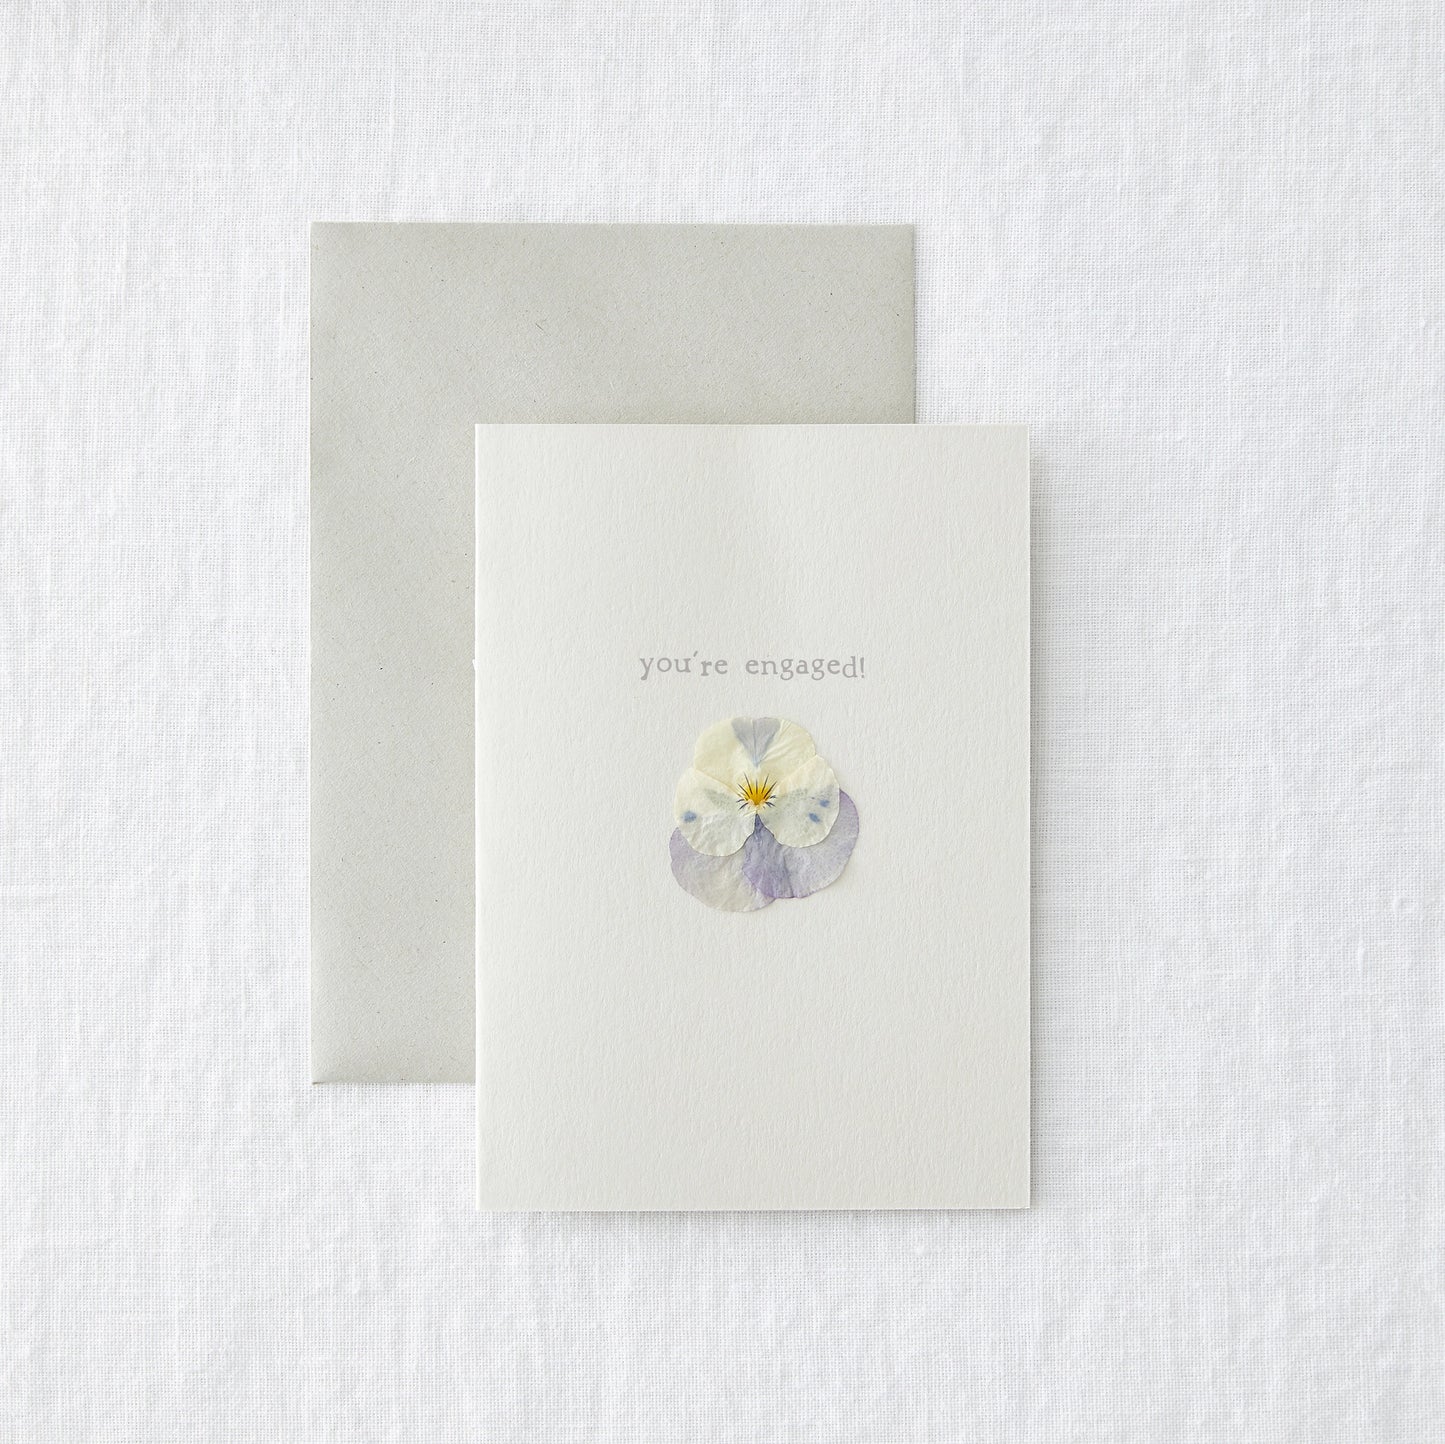 Engagement Greeting Card with Pressed Flower